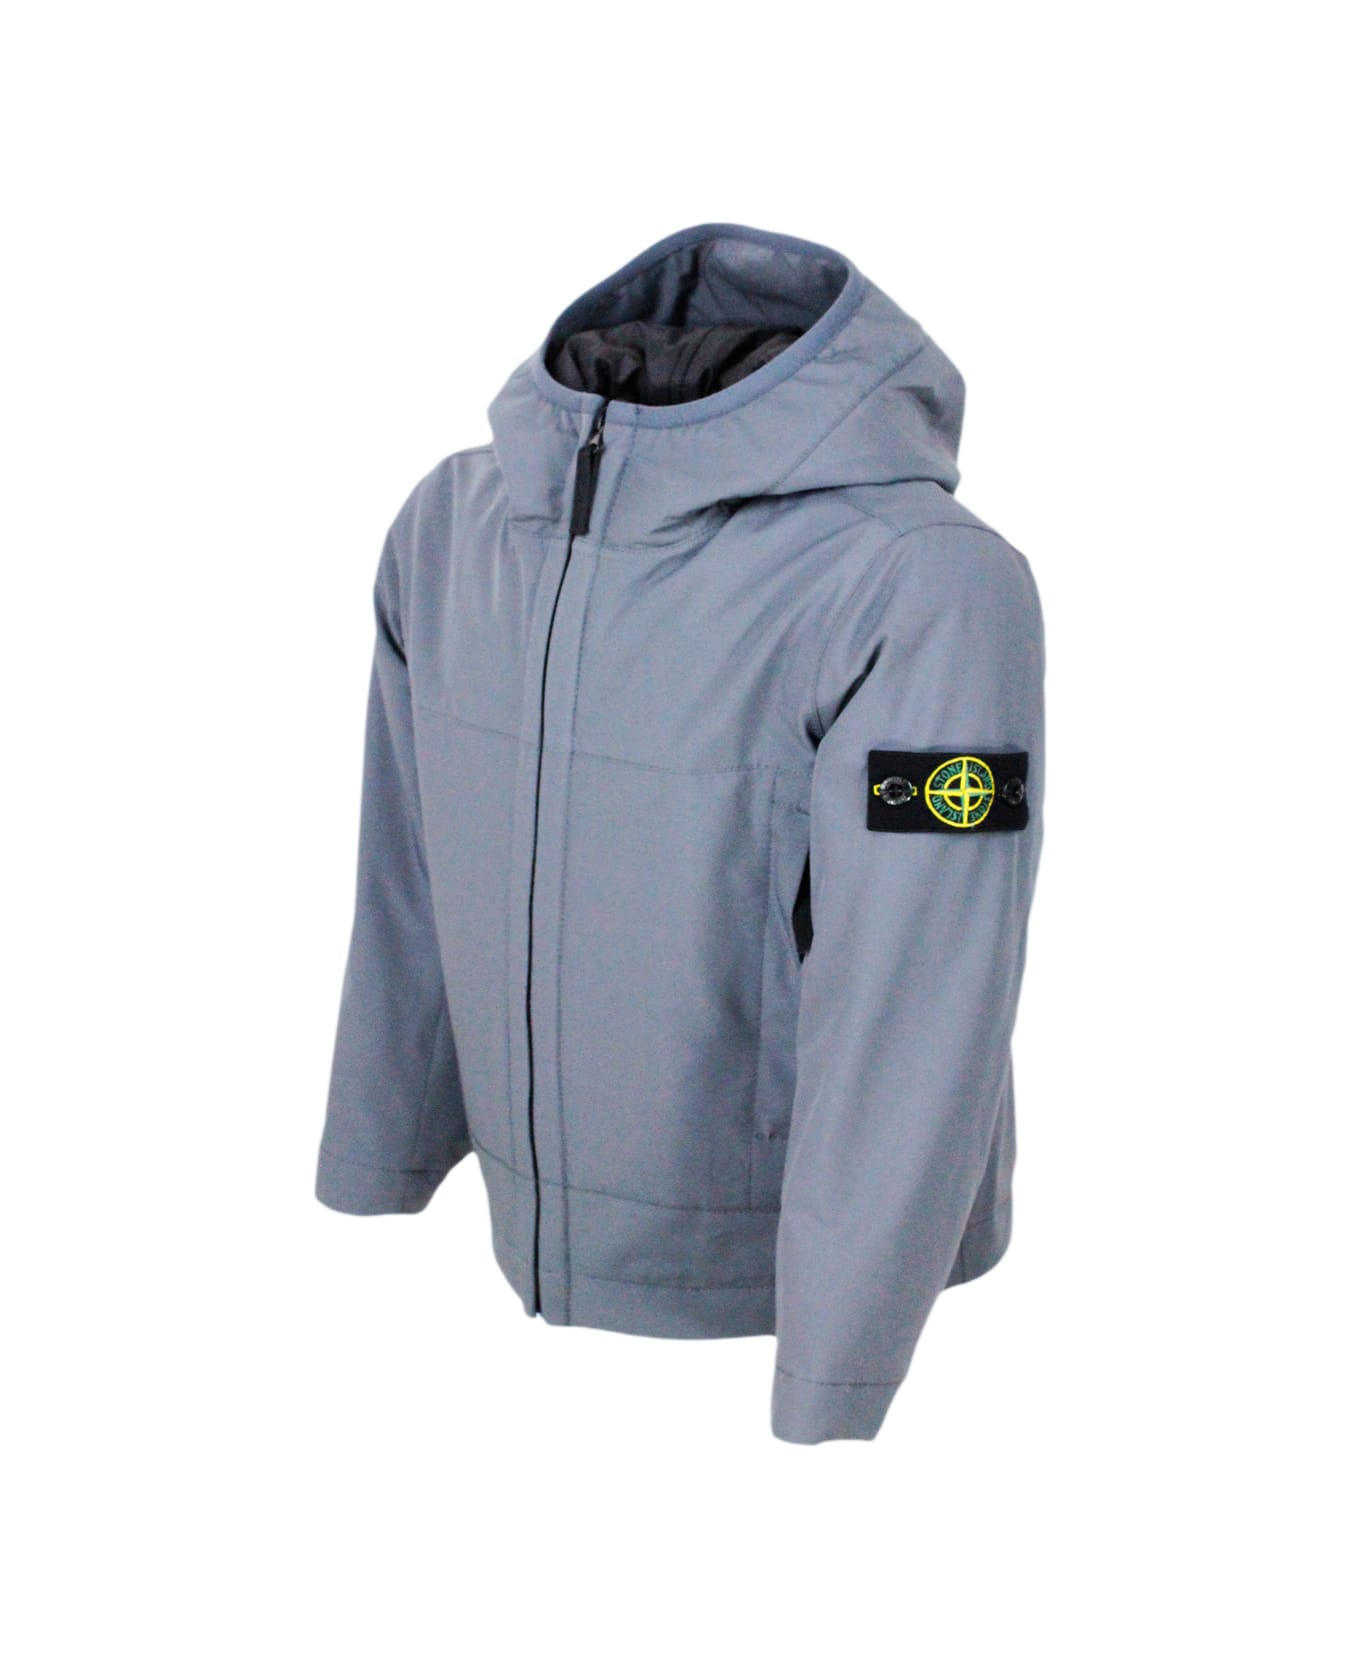 Stone Island Padded Jacket With Hood In Technical Fabric Made With Recycled Bottles E.dye Technology With Primaloft Insulation Technology - Grey